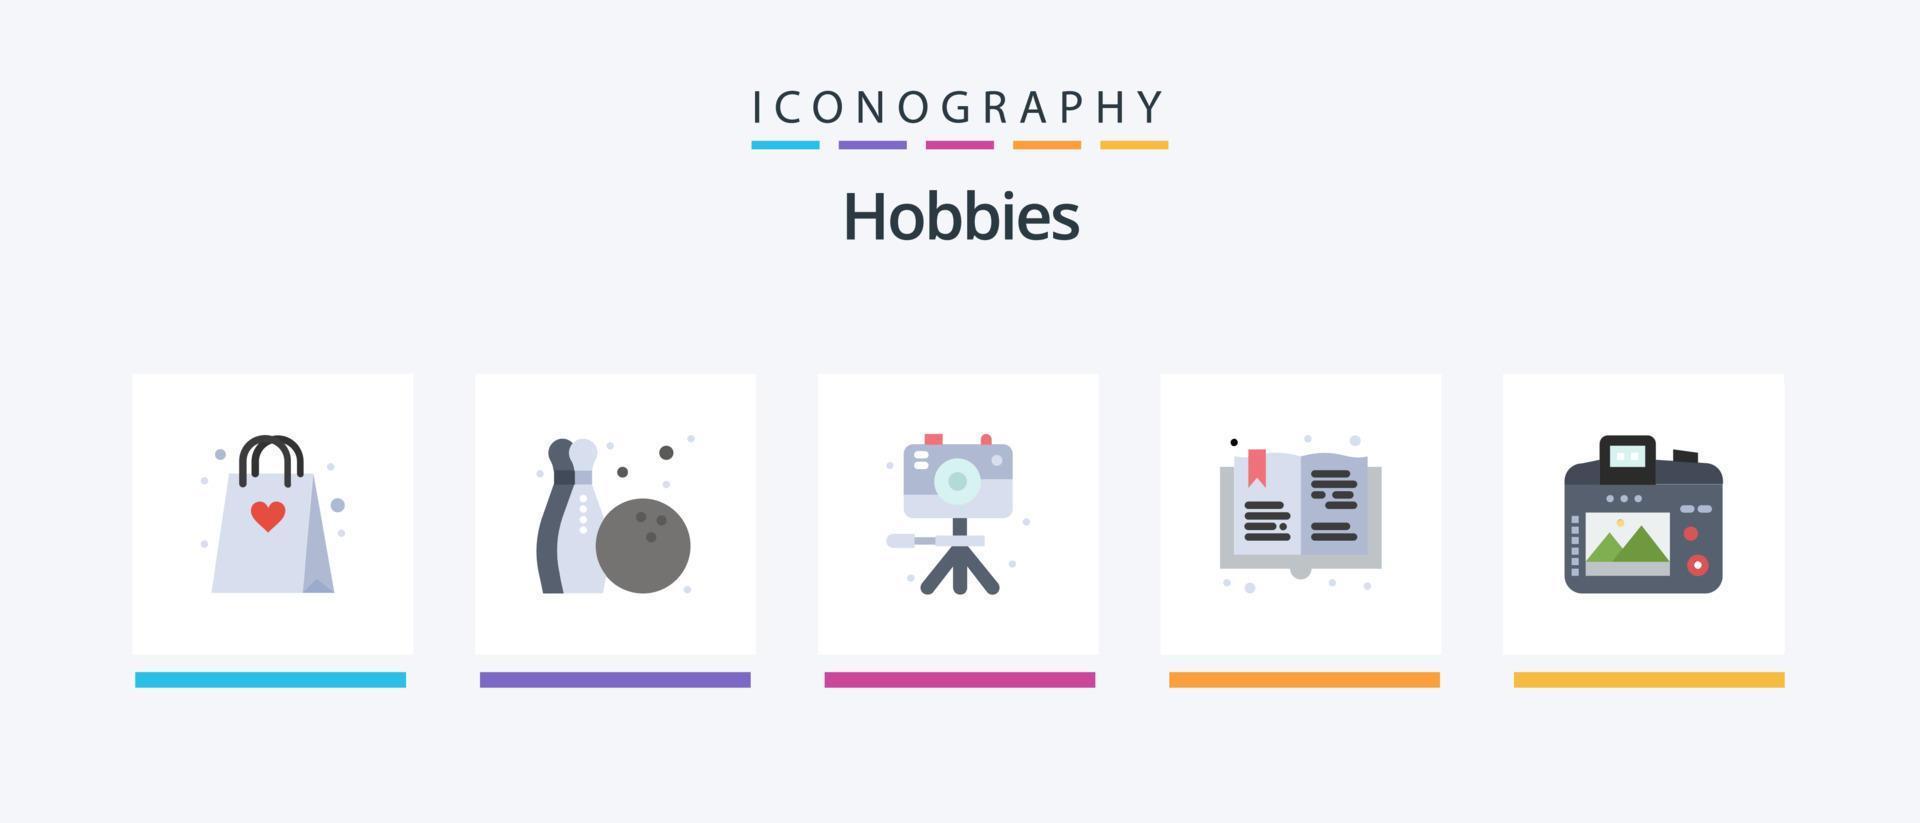 Hobbies Flat 5 Icon Pack Including hobbies. camera. image. hobby. read. Creative Icons Design vector